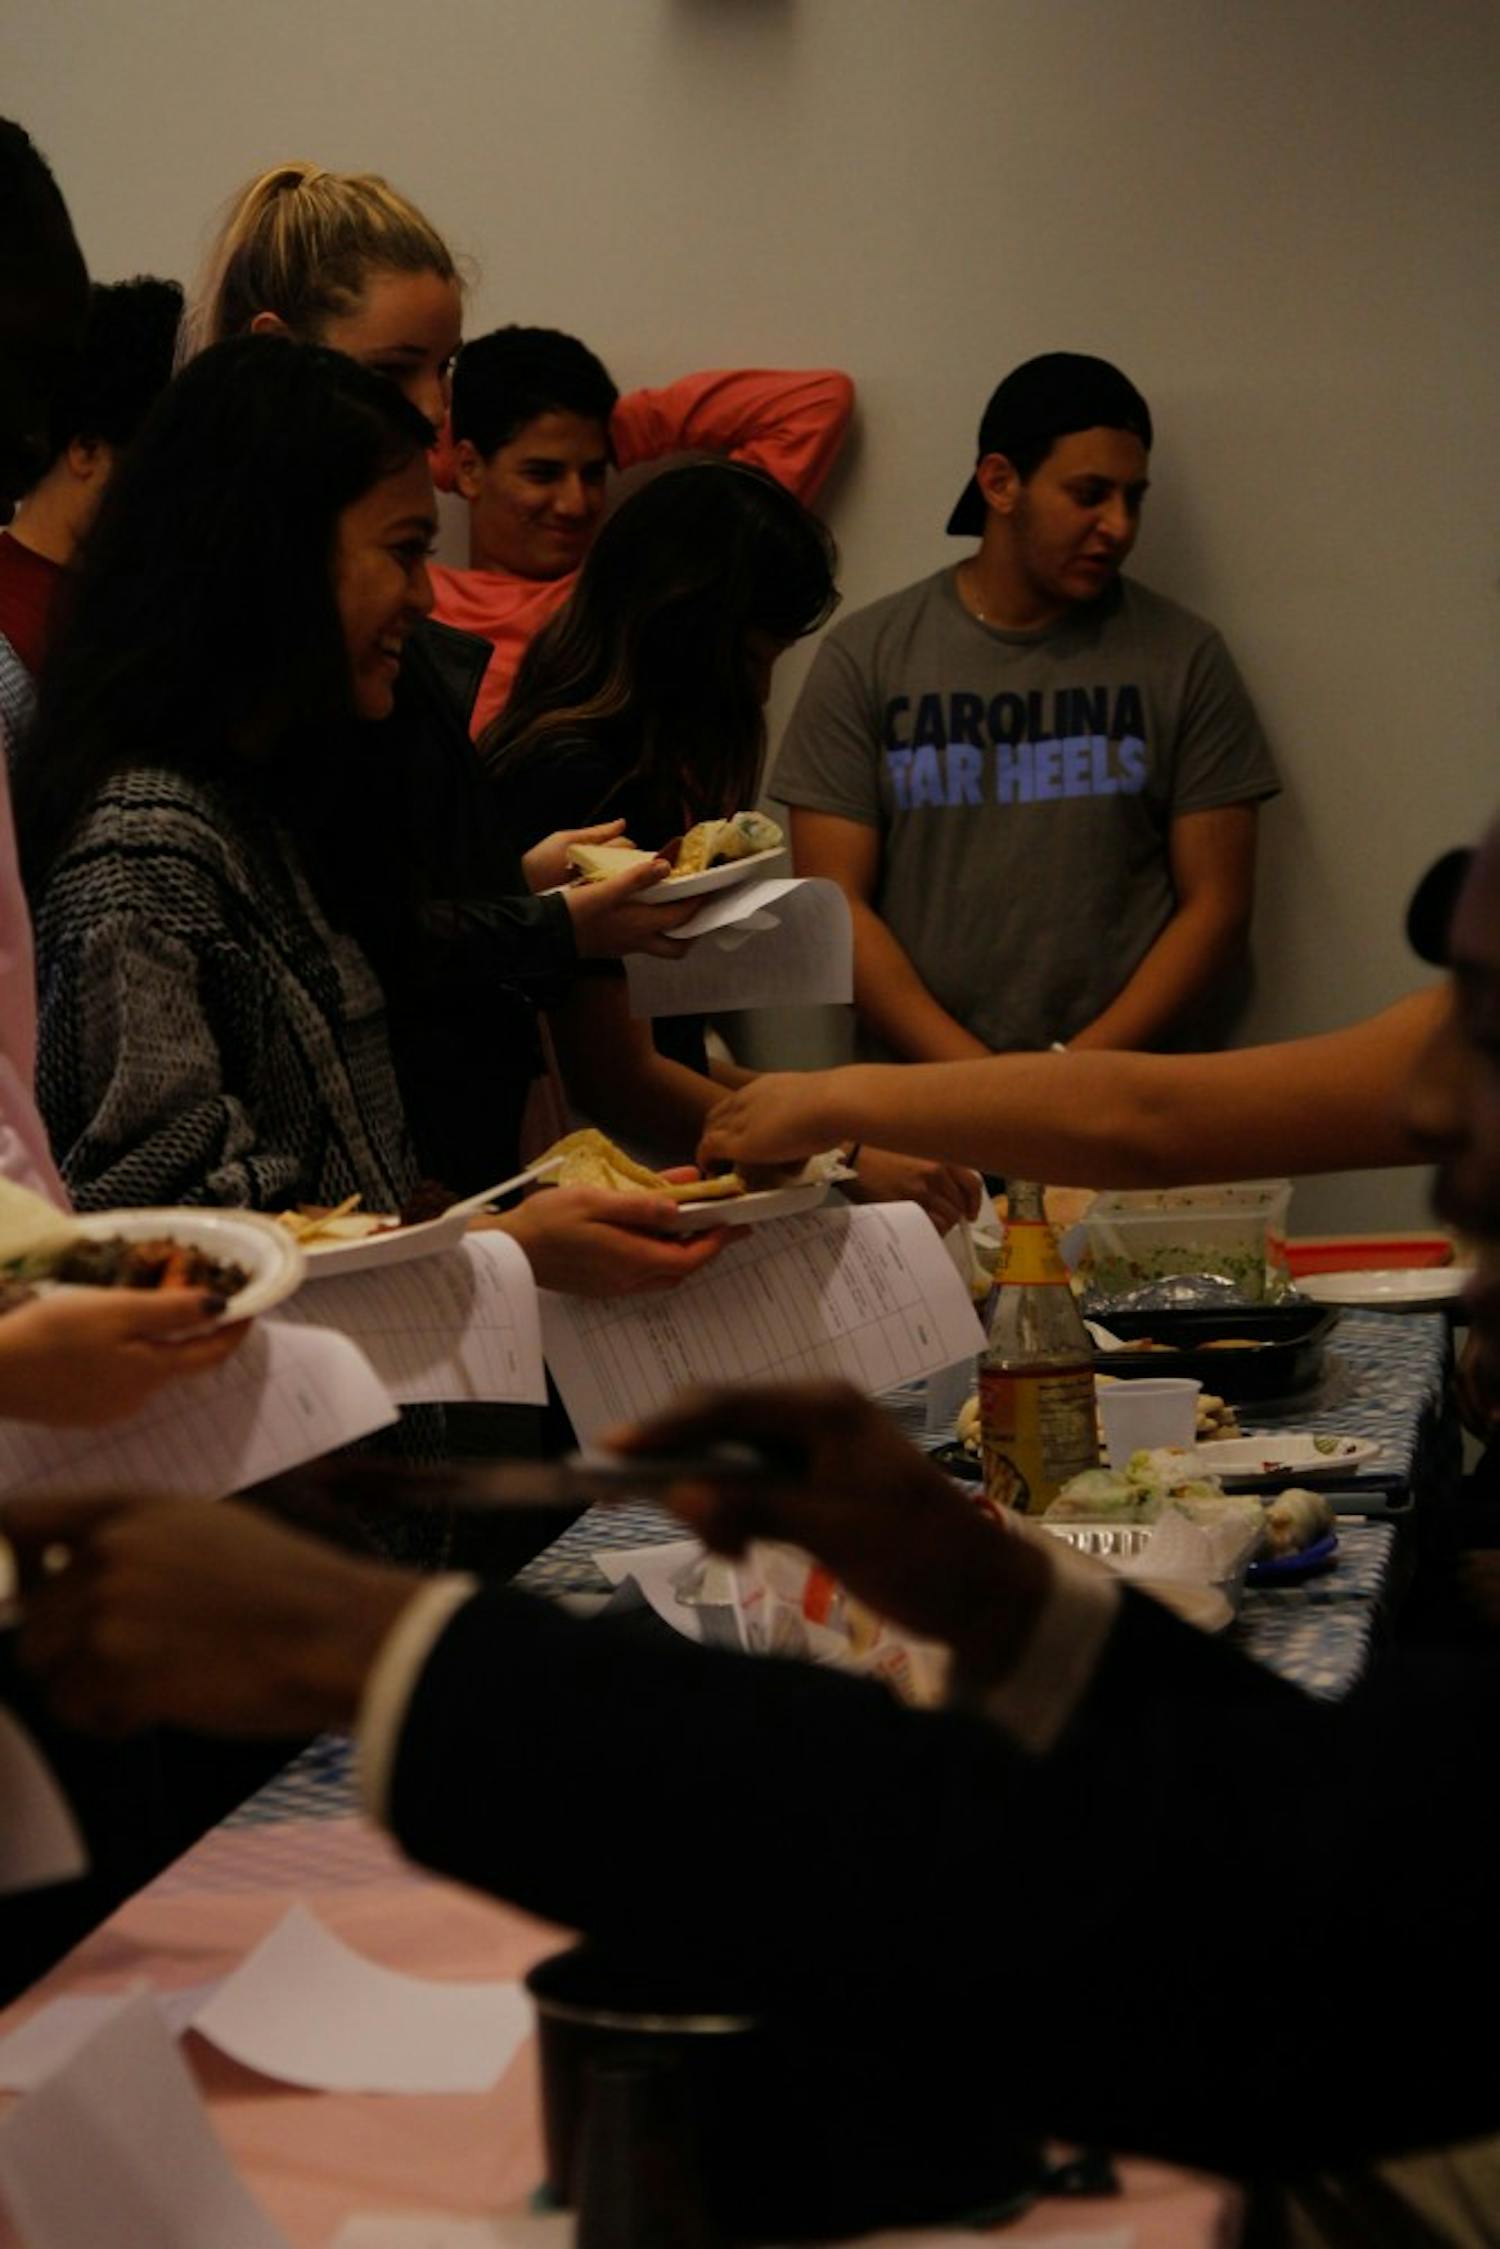 At the FedEx Global Center on Monday night, students in the Arabic Program hosted a friendly cooking competition and shared a large spread of both traditional Arabic dishes and other miscellaneous treats.